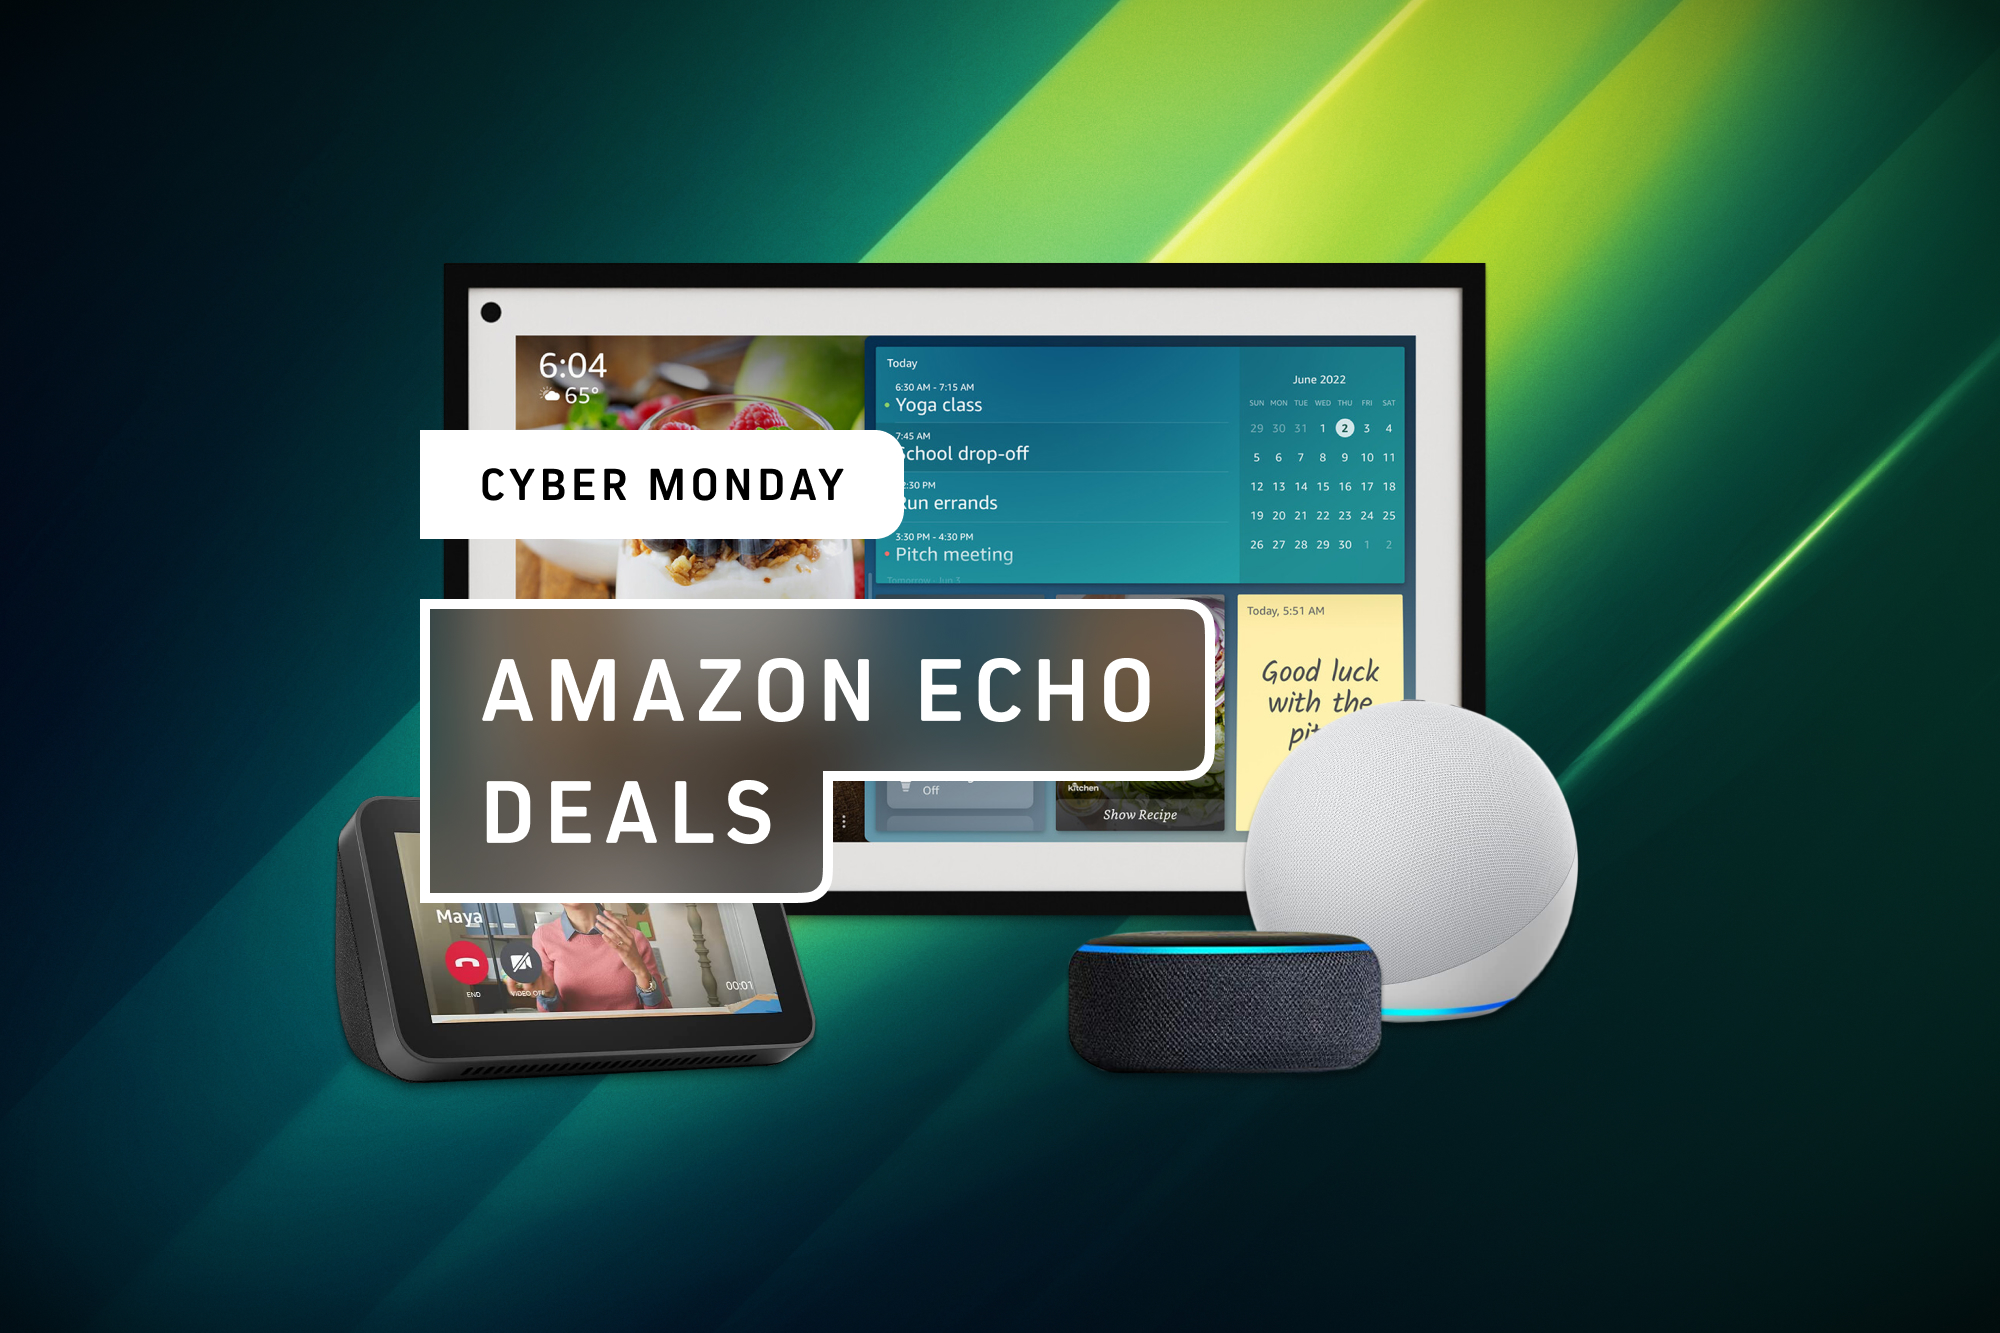 shoppers can get 25% off new Echo Hub - the latest Alexa